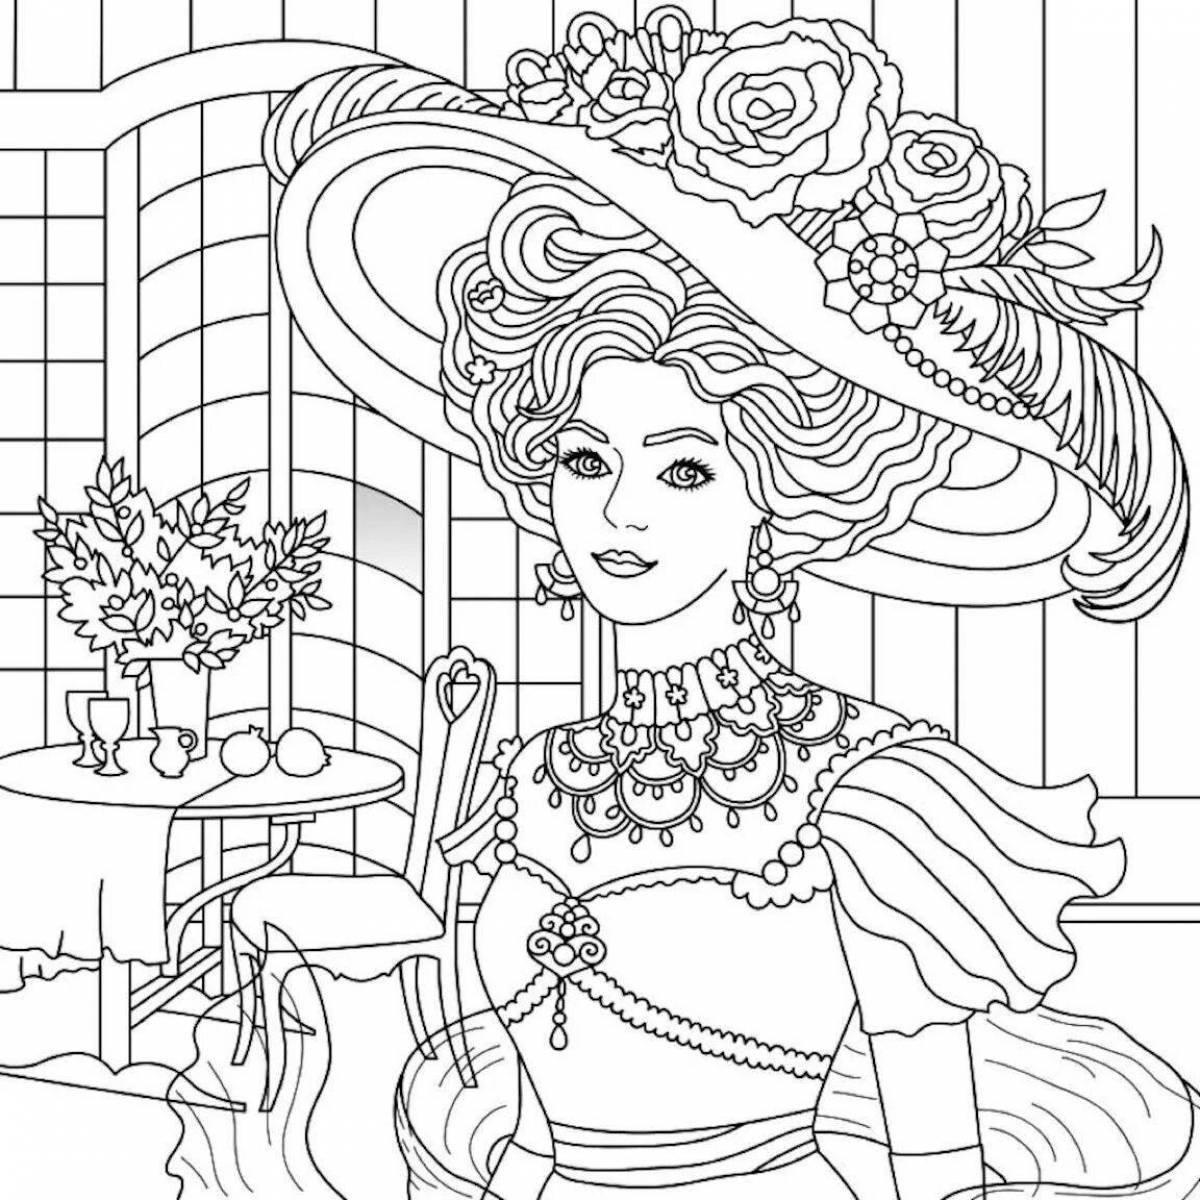 Exquisite coloring book for 19 year old girls